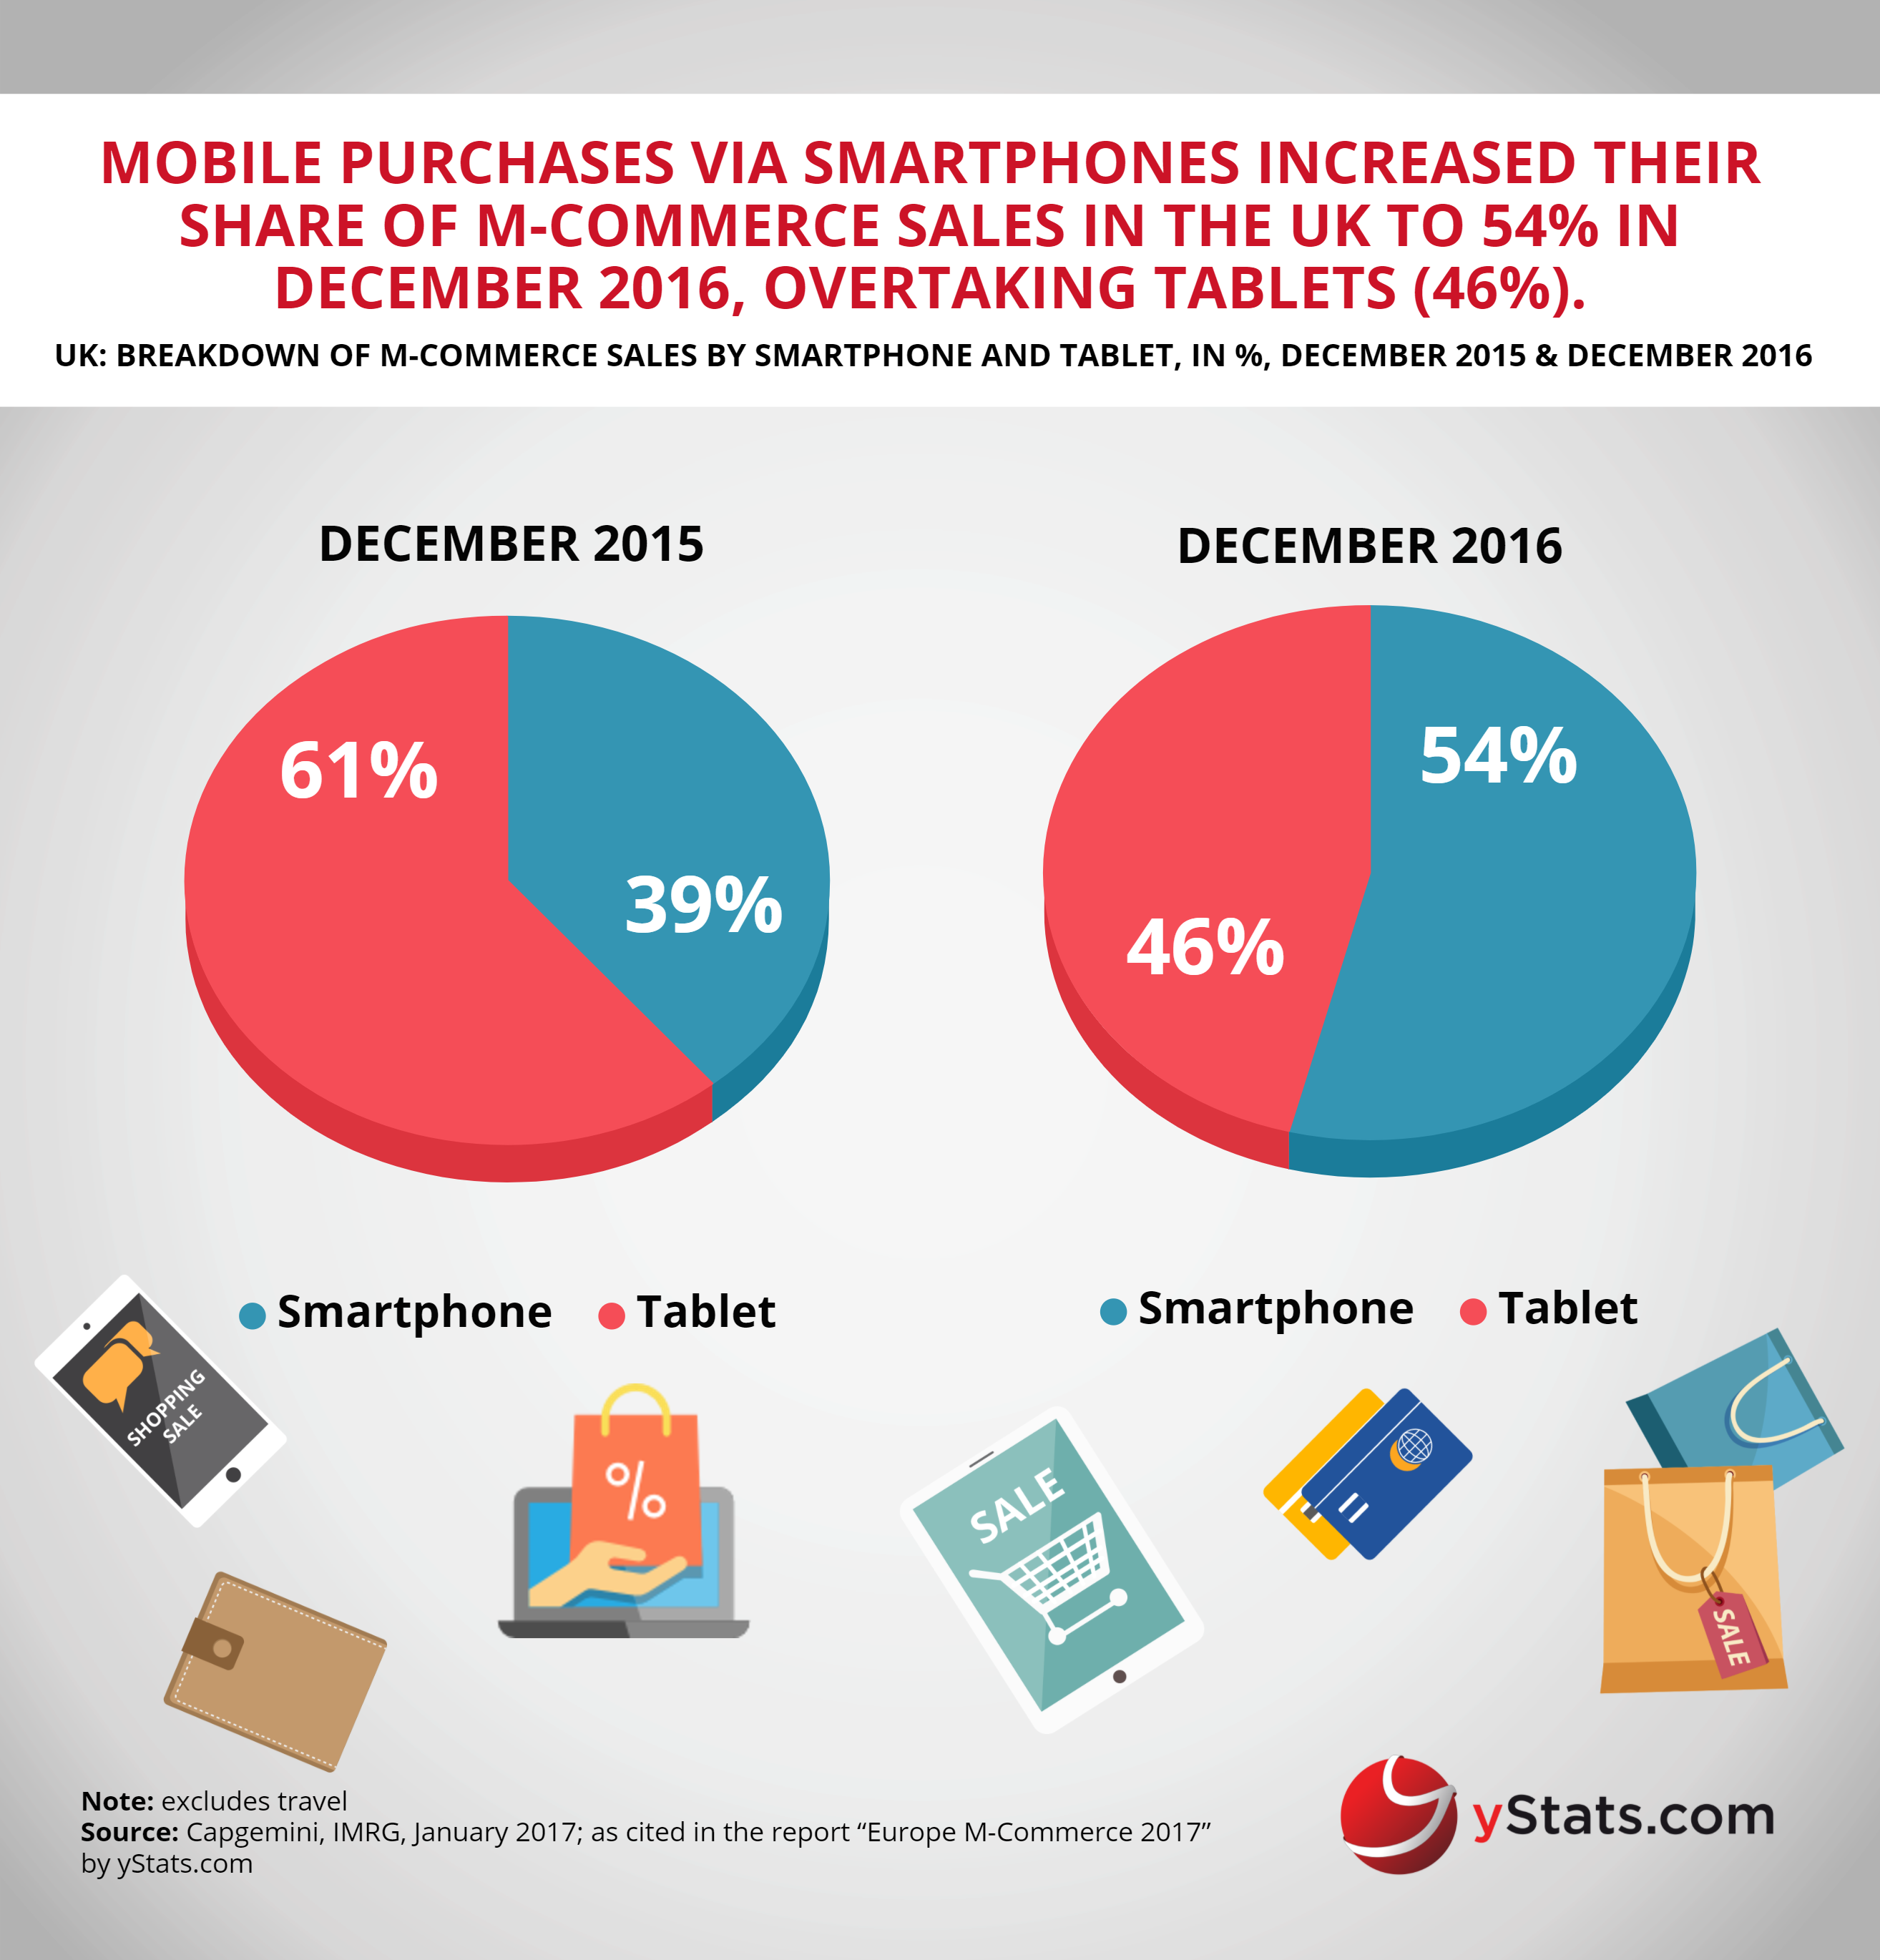 mcommerce sales by smartphone and tablet in UK